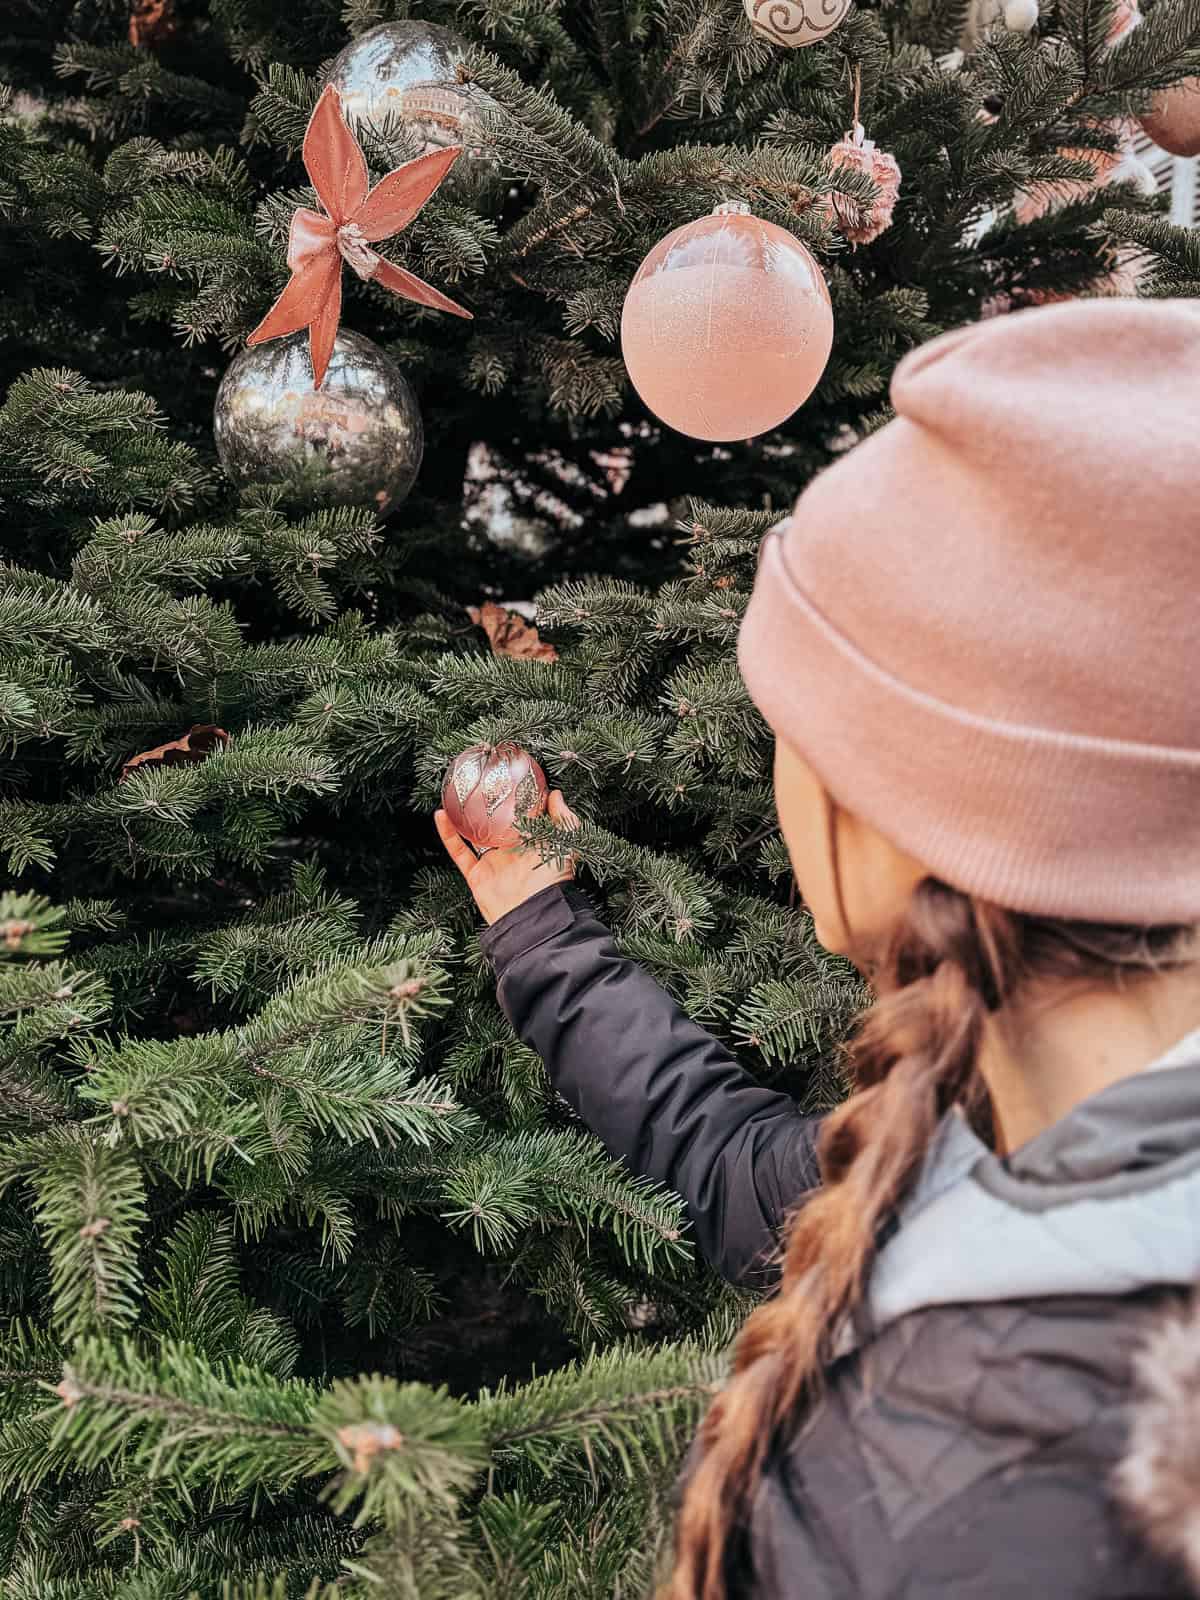 A child reaching out to a Christmas tree adorned with large baubles and bows, capturing the magic of festive decorations in Colmar.